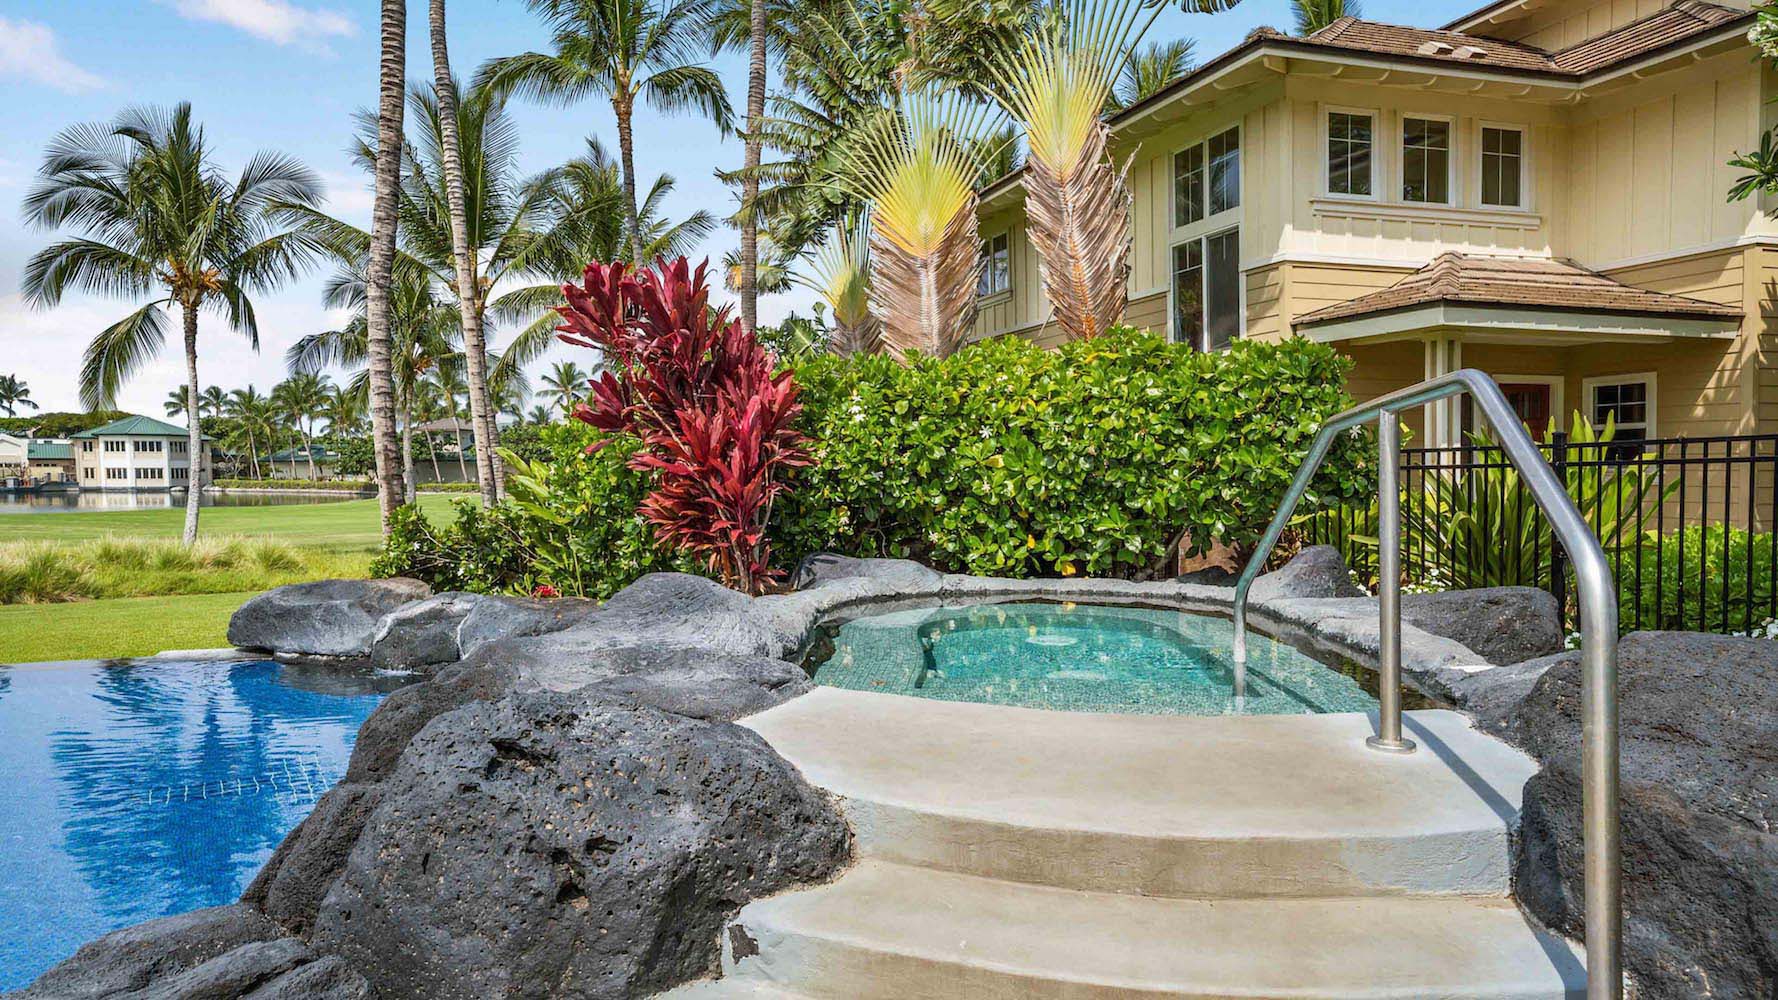 Outdoor hot tub with tropical landscaping